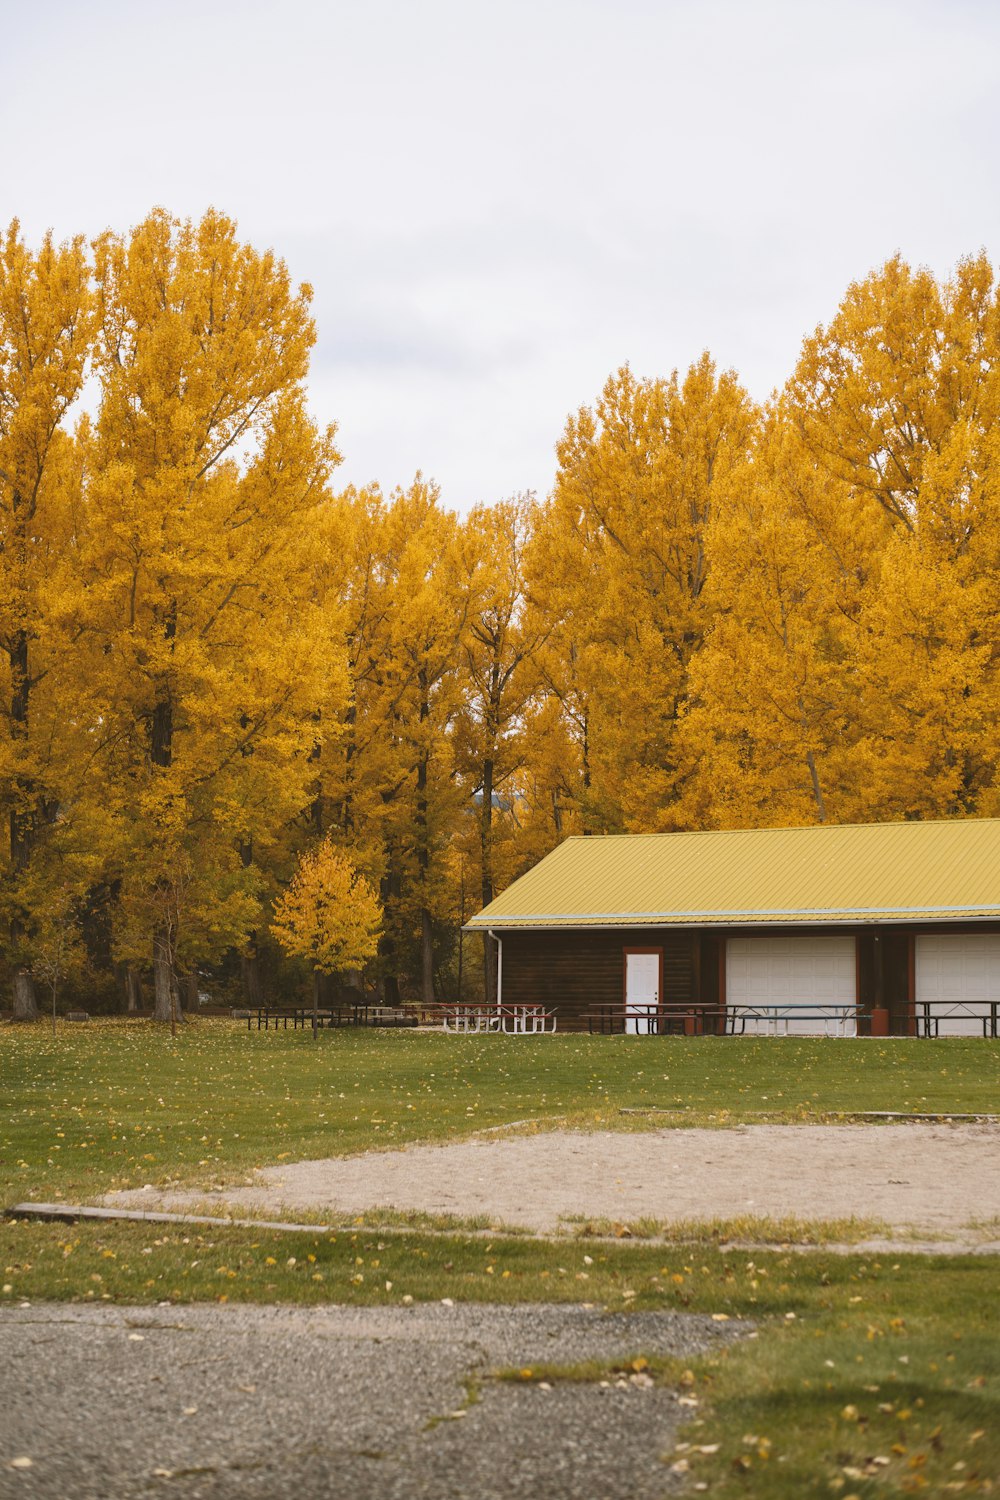 a yellow and white barn in a field with trees in the background